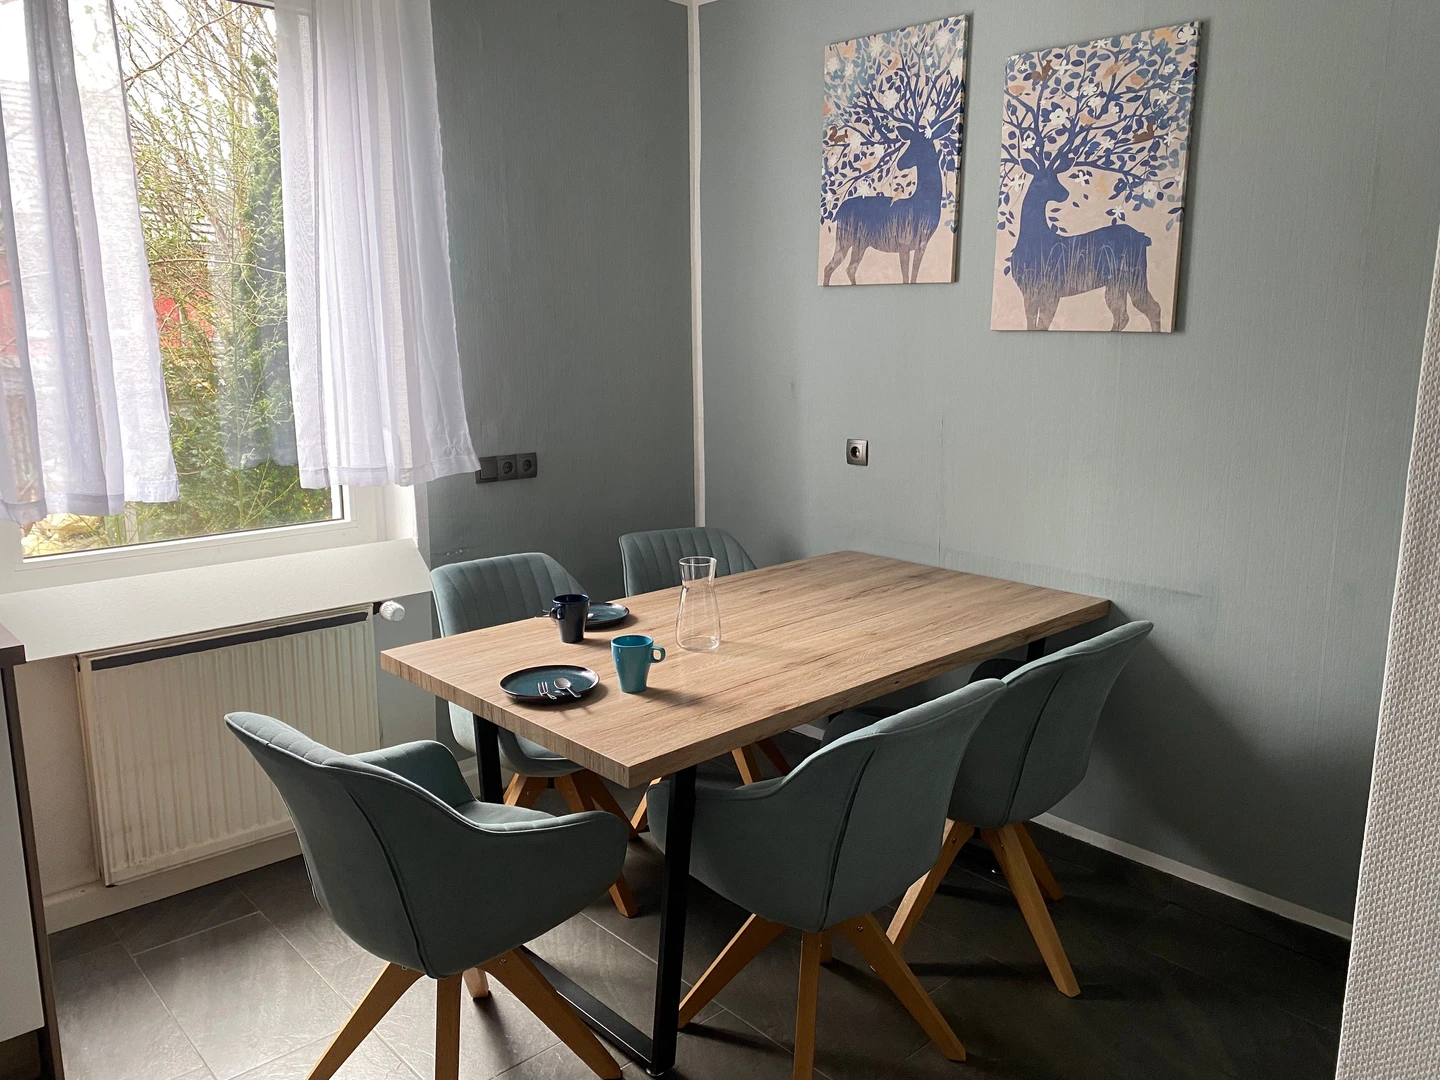 Renting rooms by the month in Dortmund